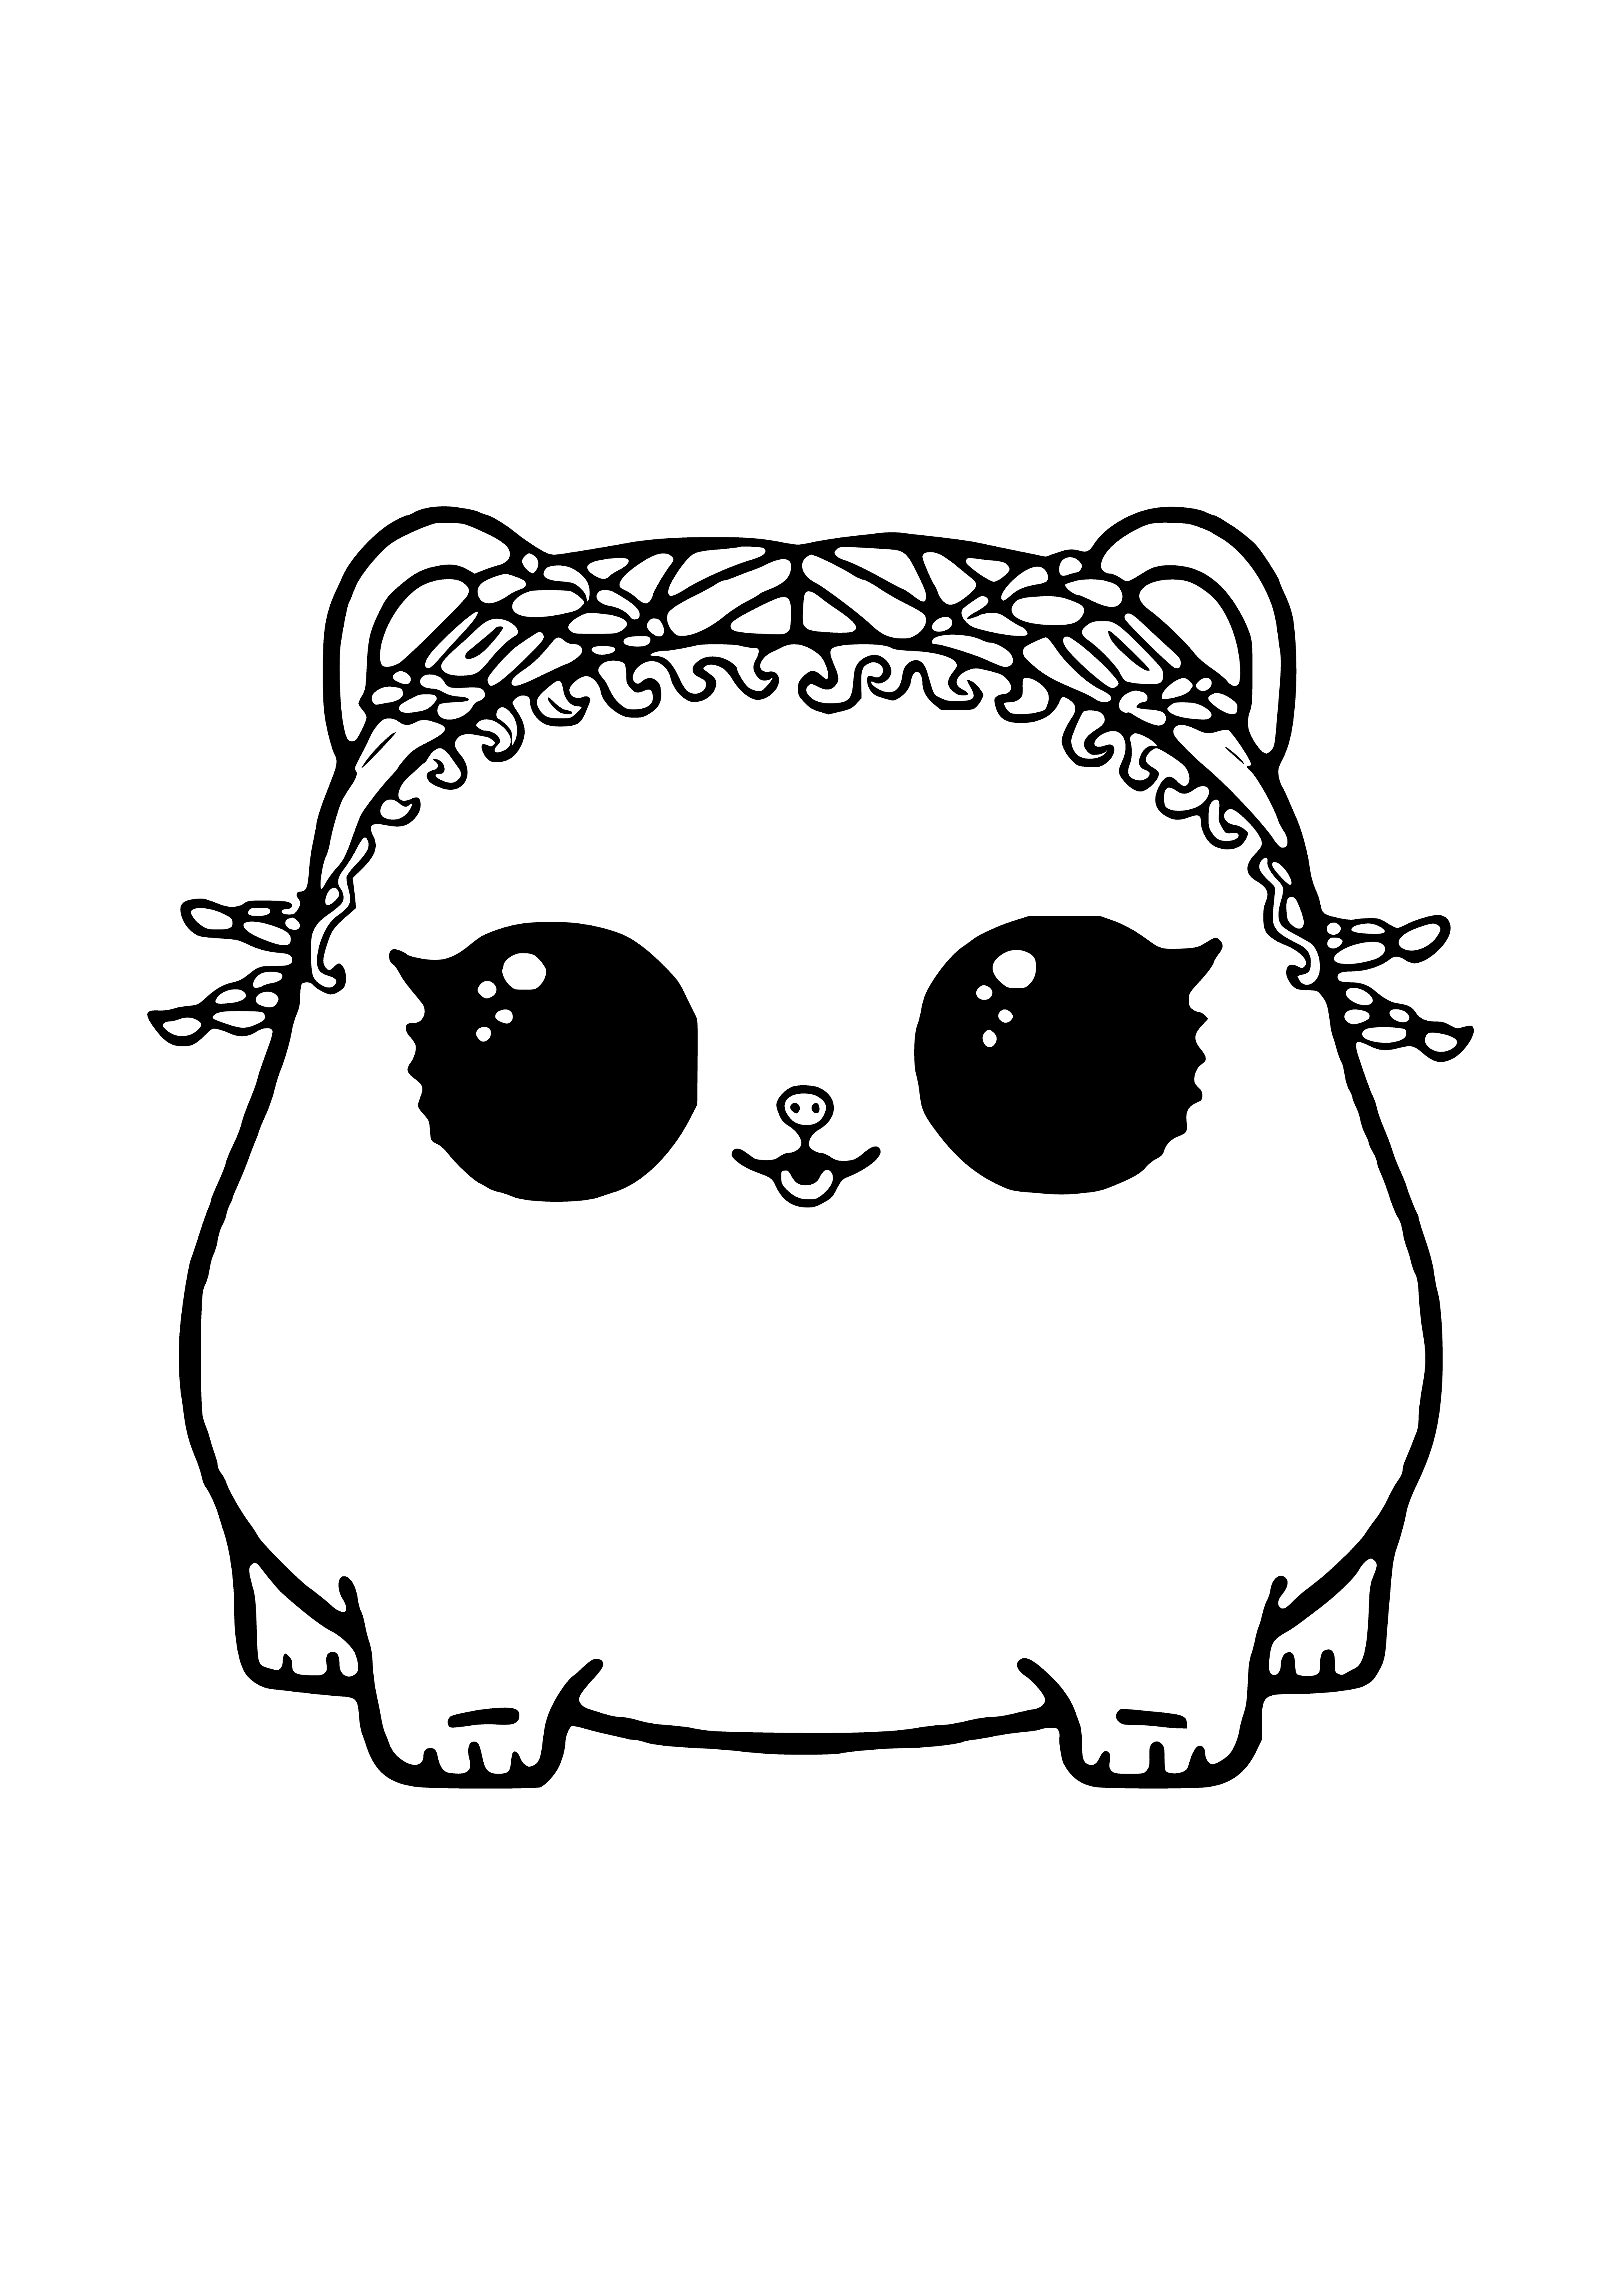 coloring page: Hamster in red and white ball standing on a white surface; brown and white with brown nose and 2 eyes, tongue sticking out.